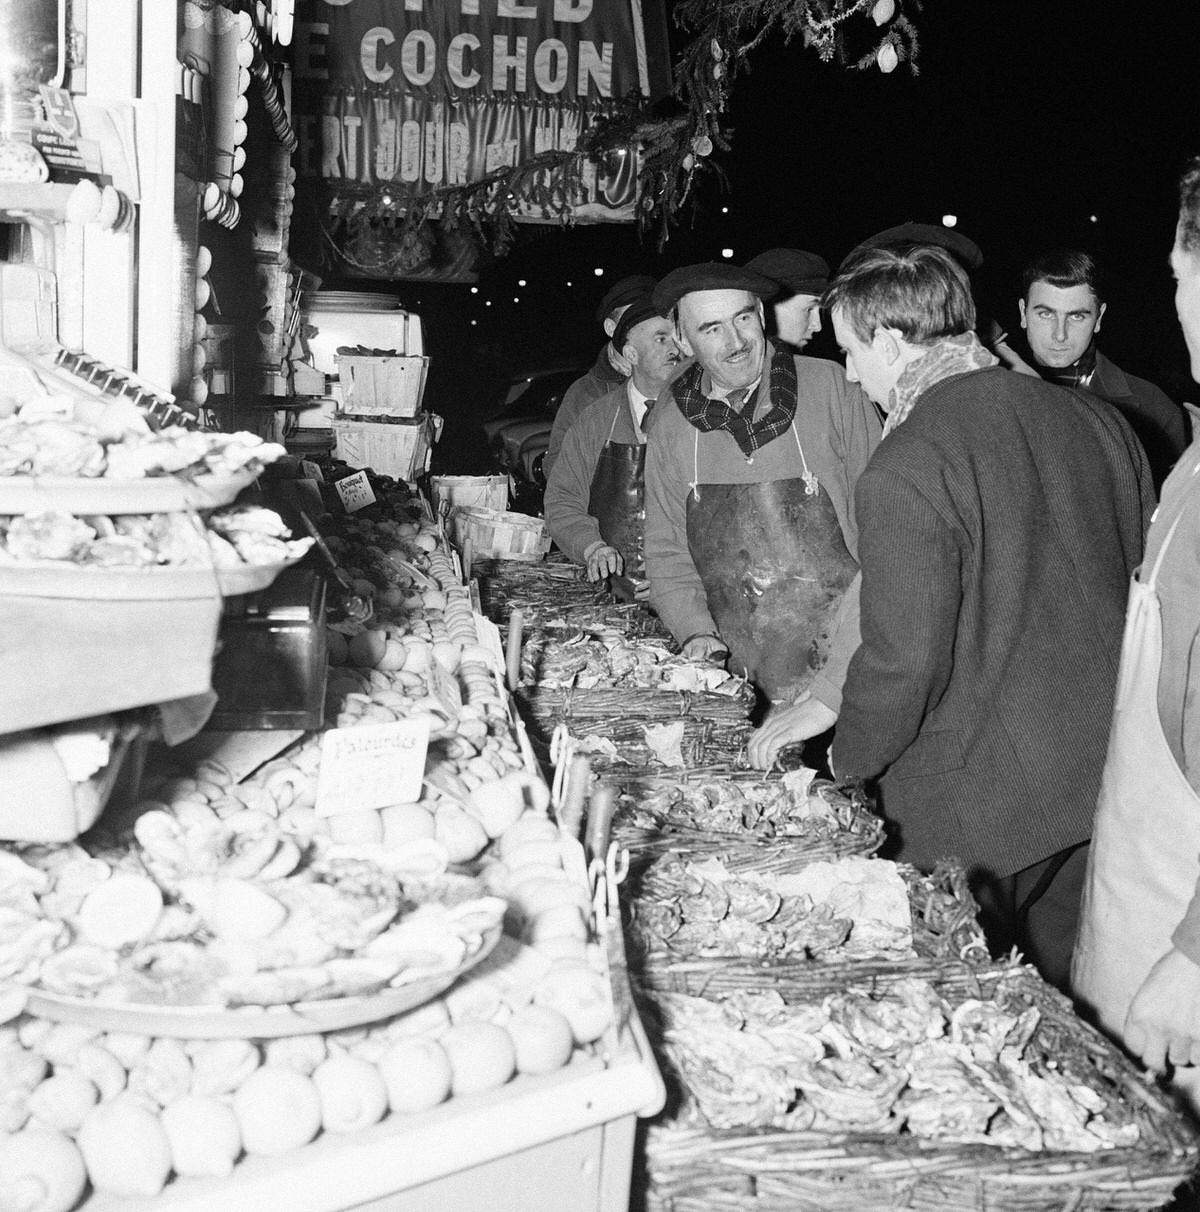 New Year's Eve shopping around the central Halles in Paris, 1959